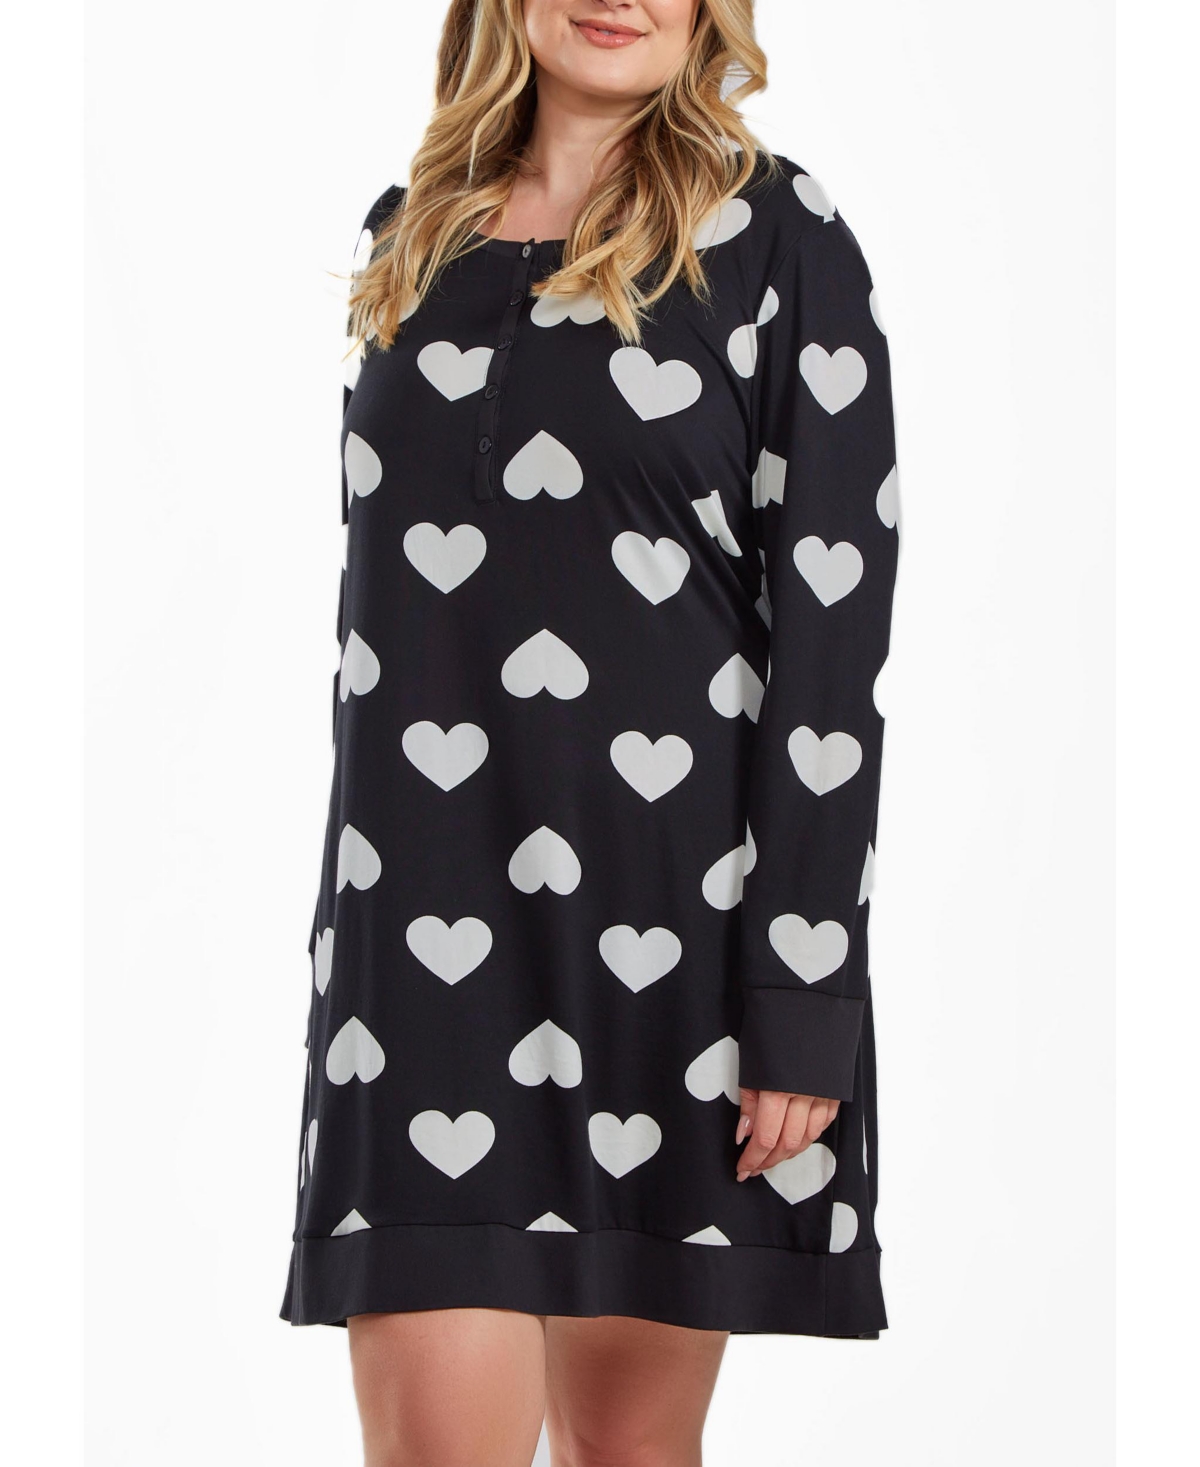 Icollection Kind Heart Plus Size Modal Sleep Top Or Dress With Button Down Top In Comfy Cozy Style In Cream-black